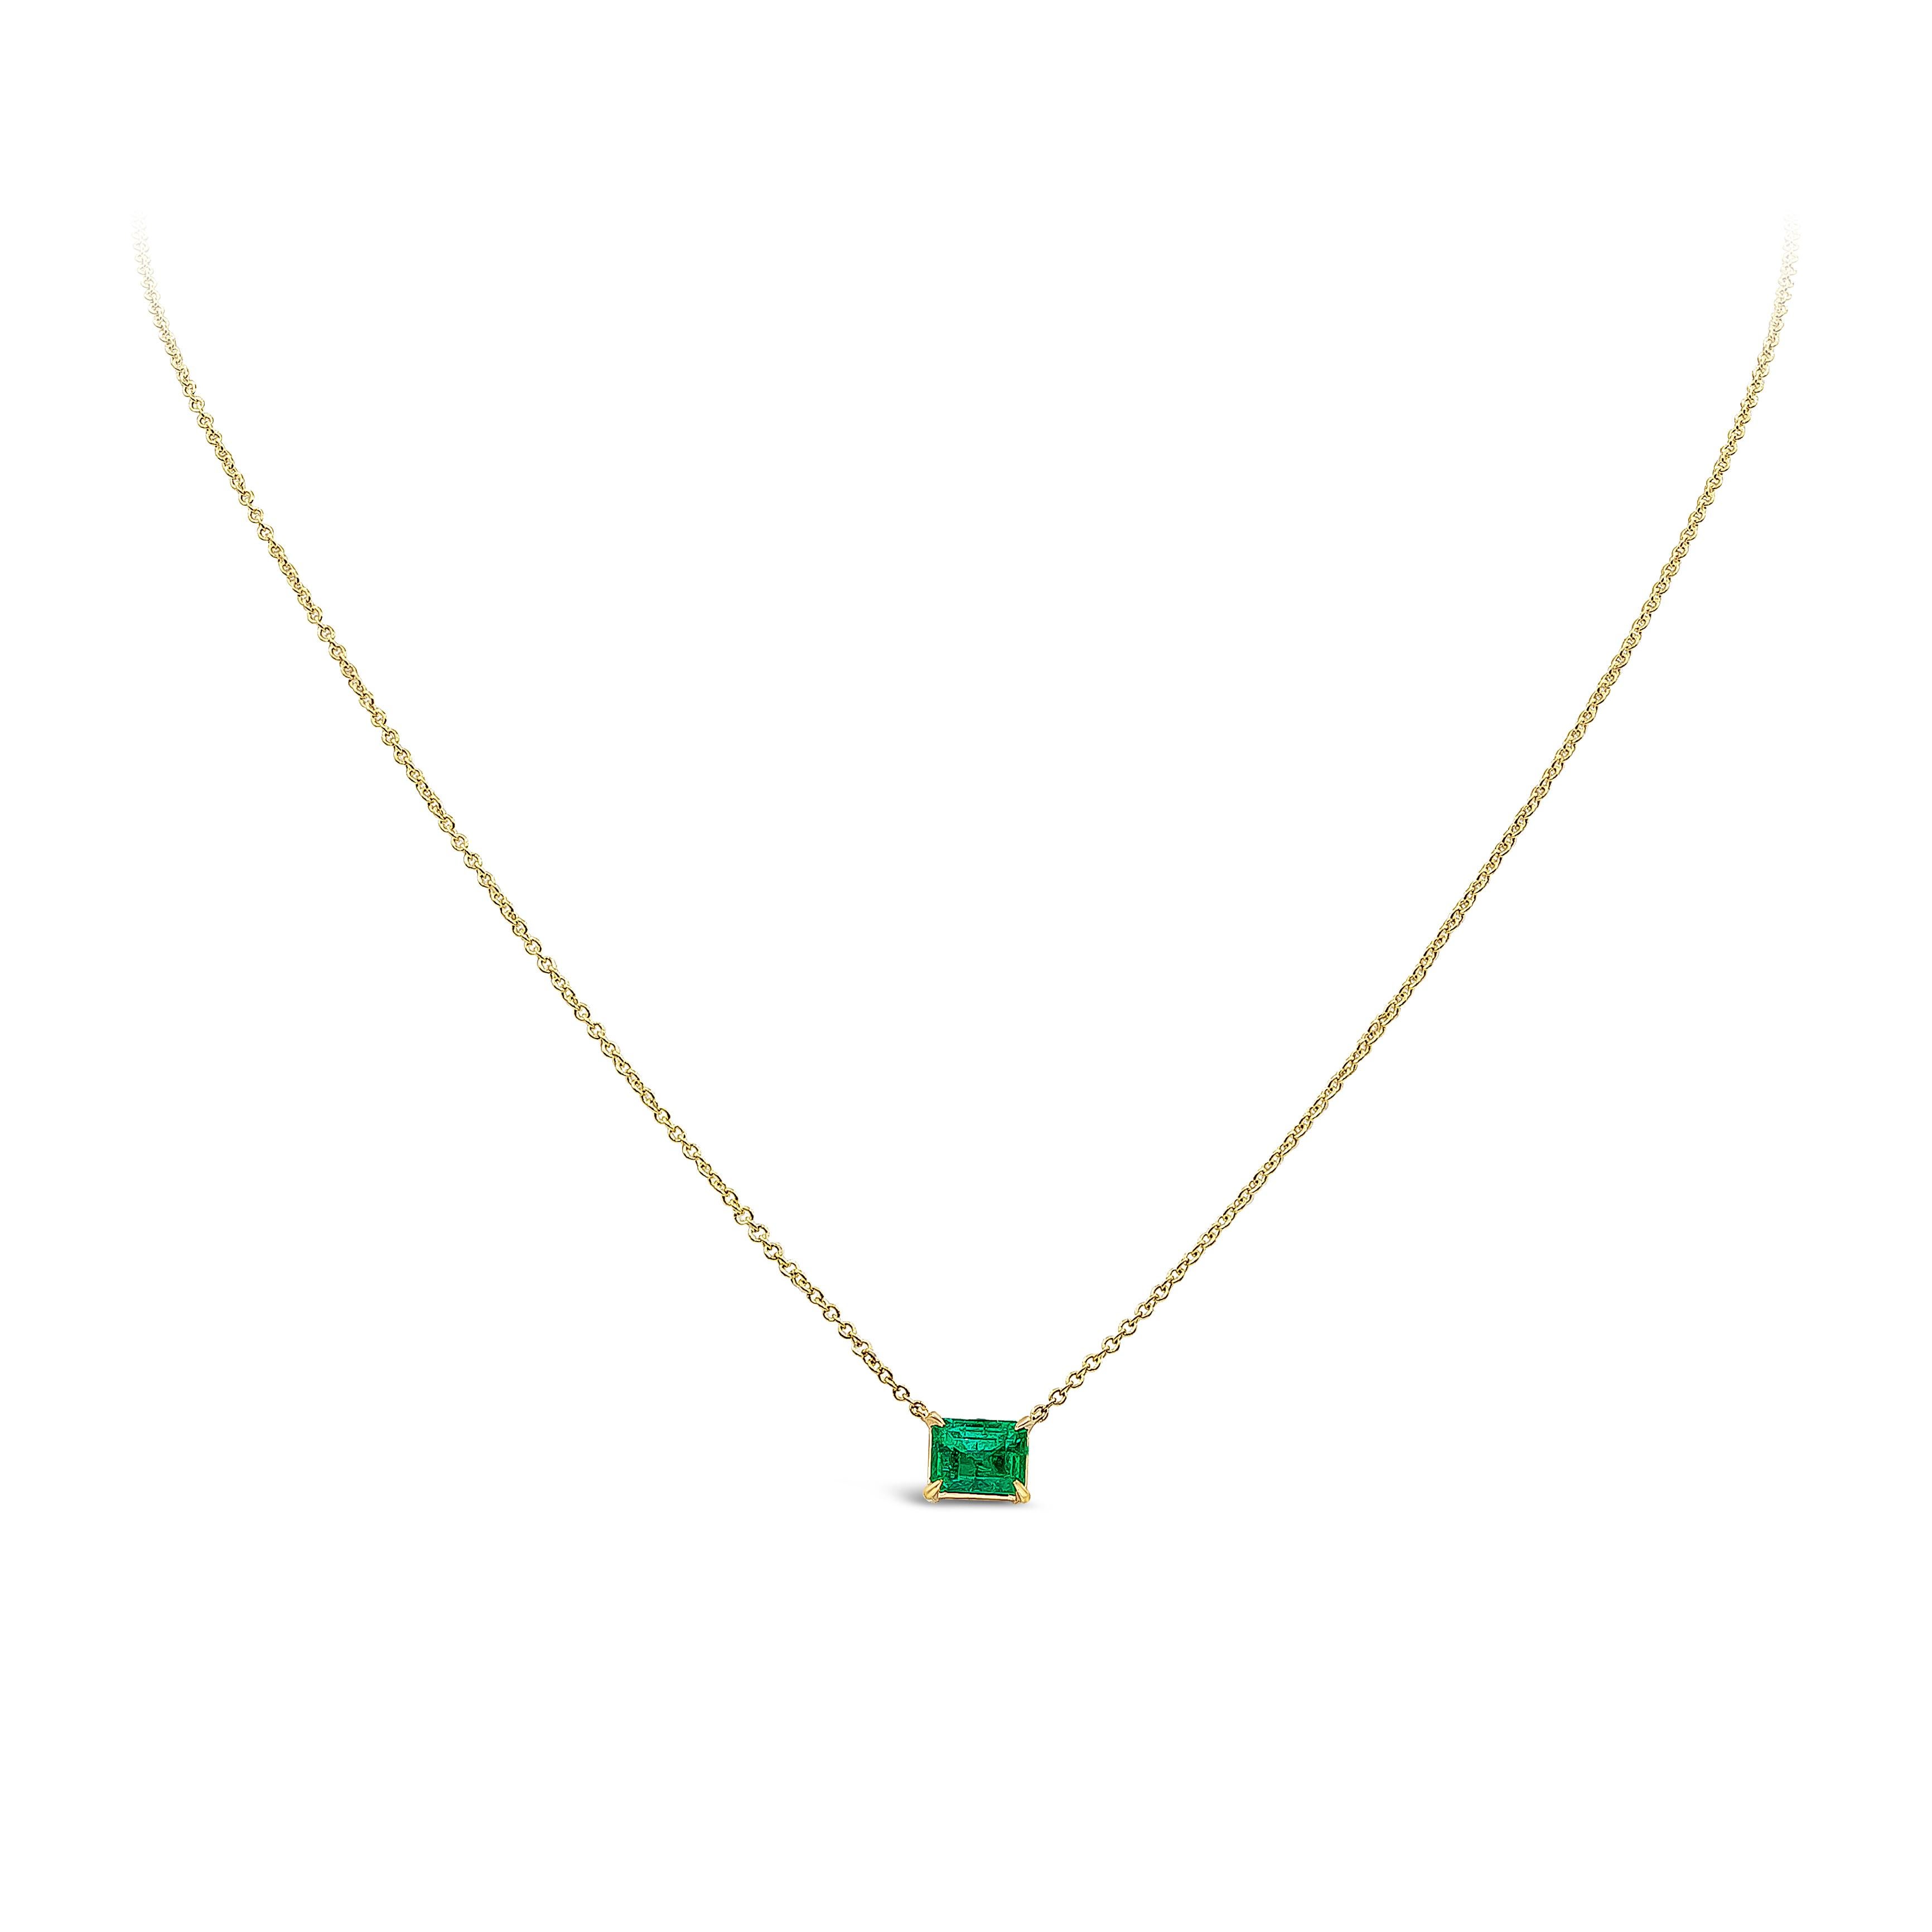  A classic solitaire pendant showcasing a 1.04 carat emerald cut green emerald, set in a four-pong basket made in yellow gold. Suspended on a 16 inch yellow gold chain (length of chain can be changed upon request). 

Style available in different